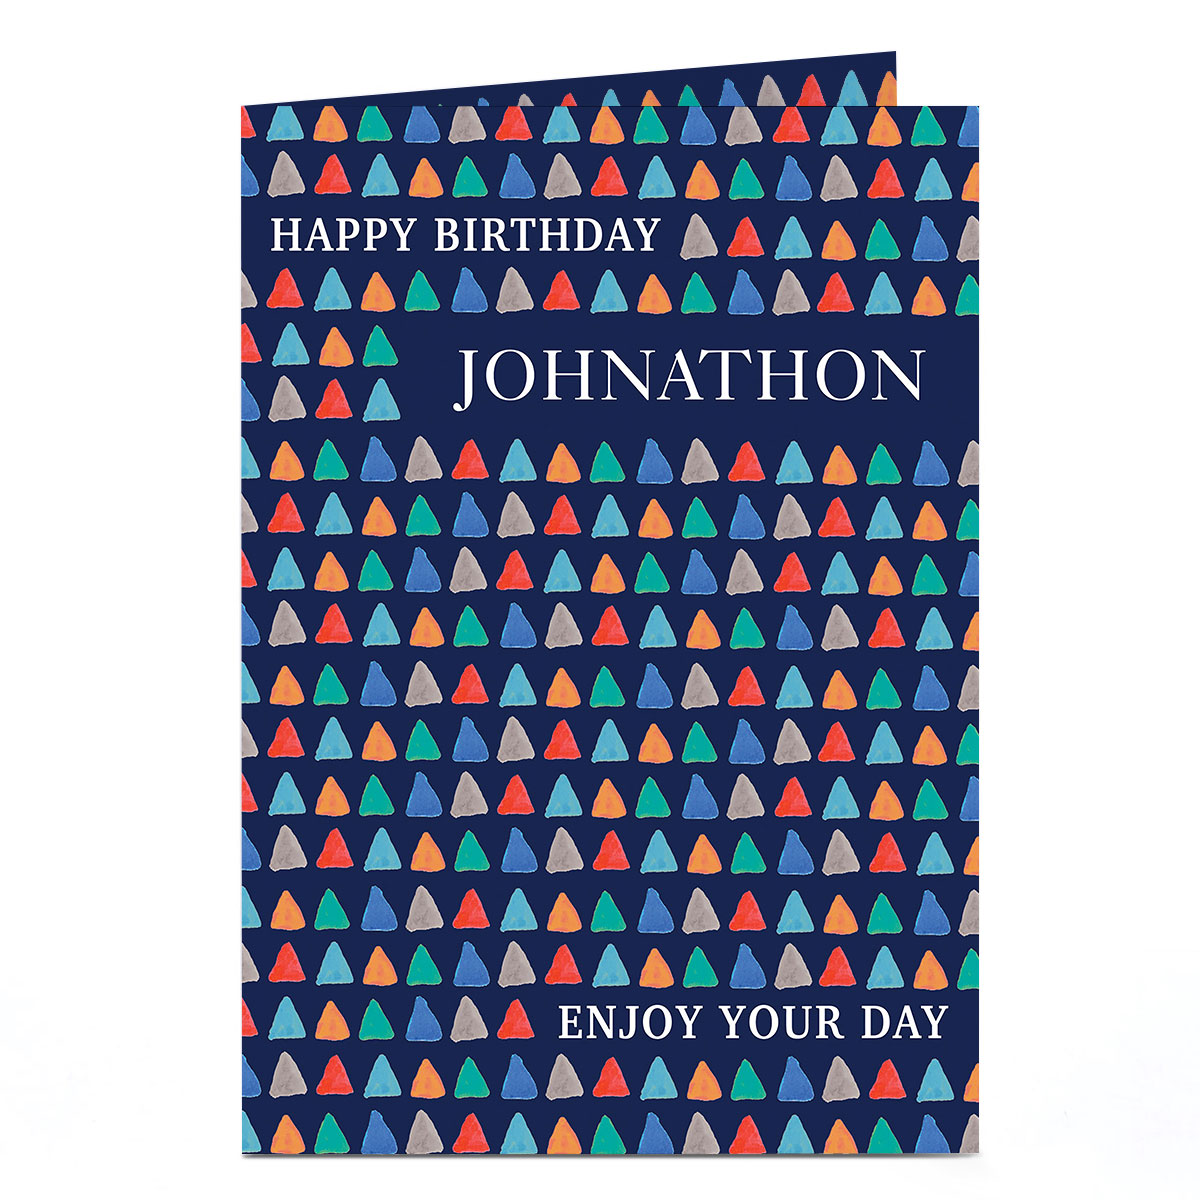 Personalised Birthday Card - Enjoy Your Day